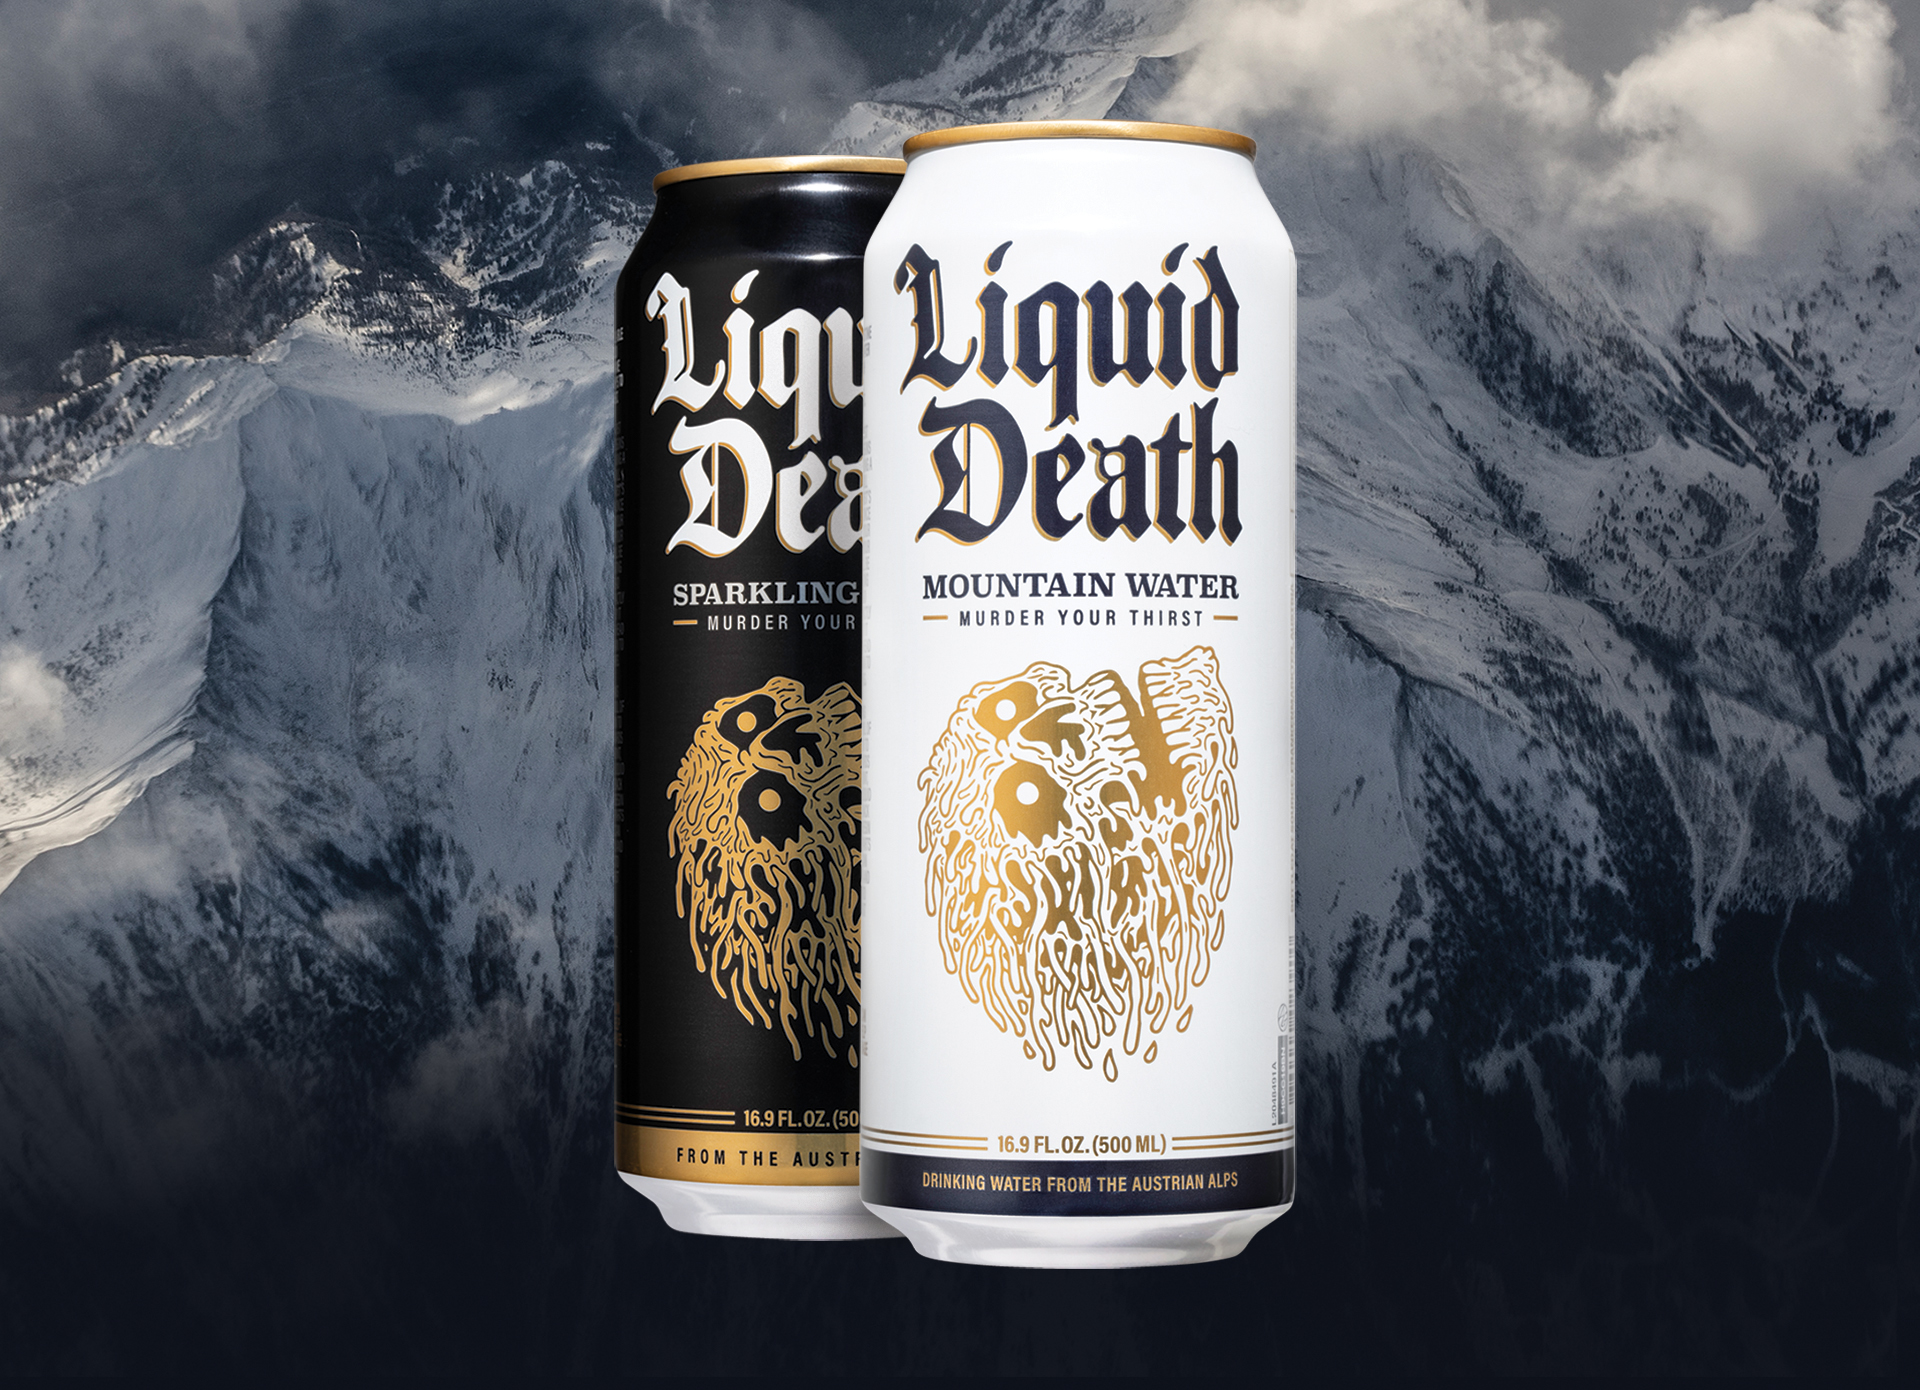 Two cans of Liquid Death, one black and one white, on a backdrop of a mountain.